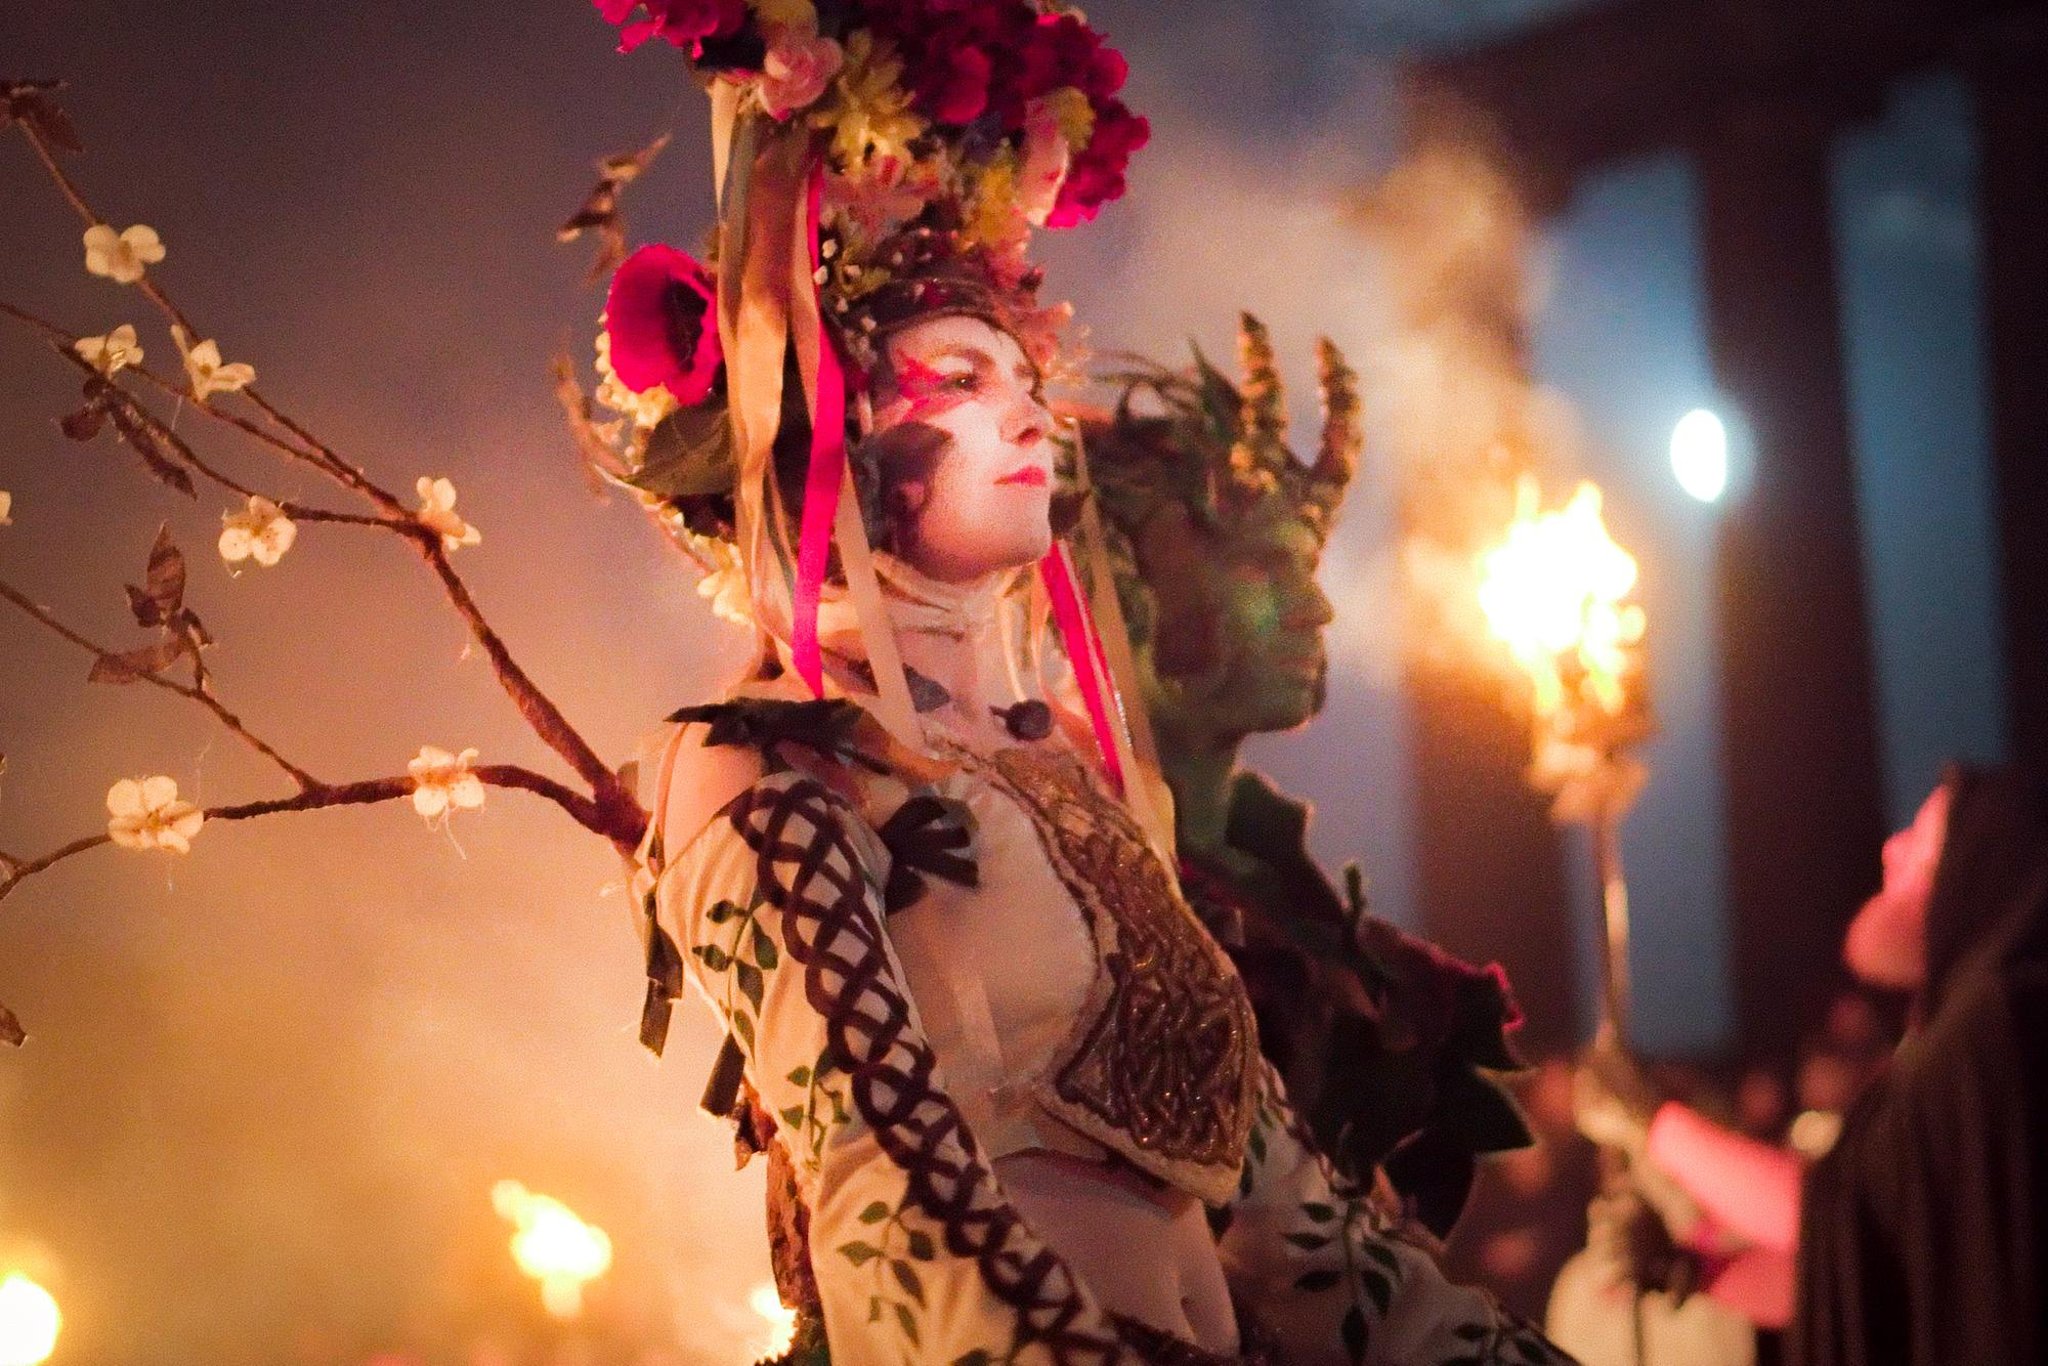 Beltane Fire Festival: Green Man to be played by a woman ...